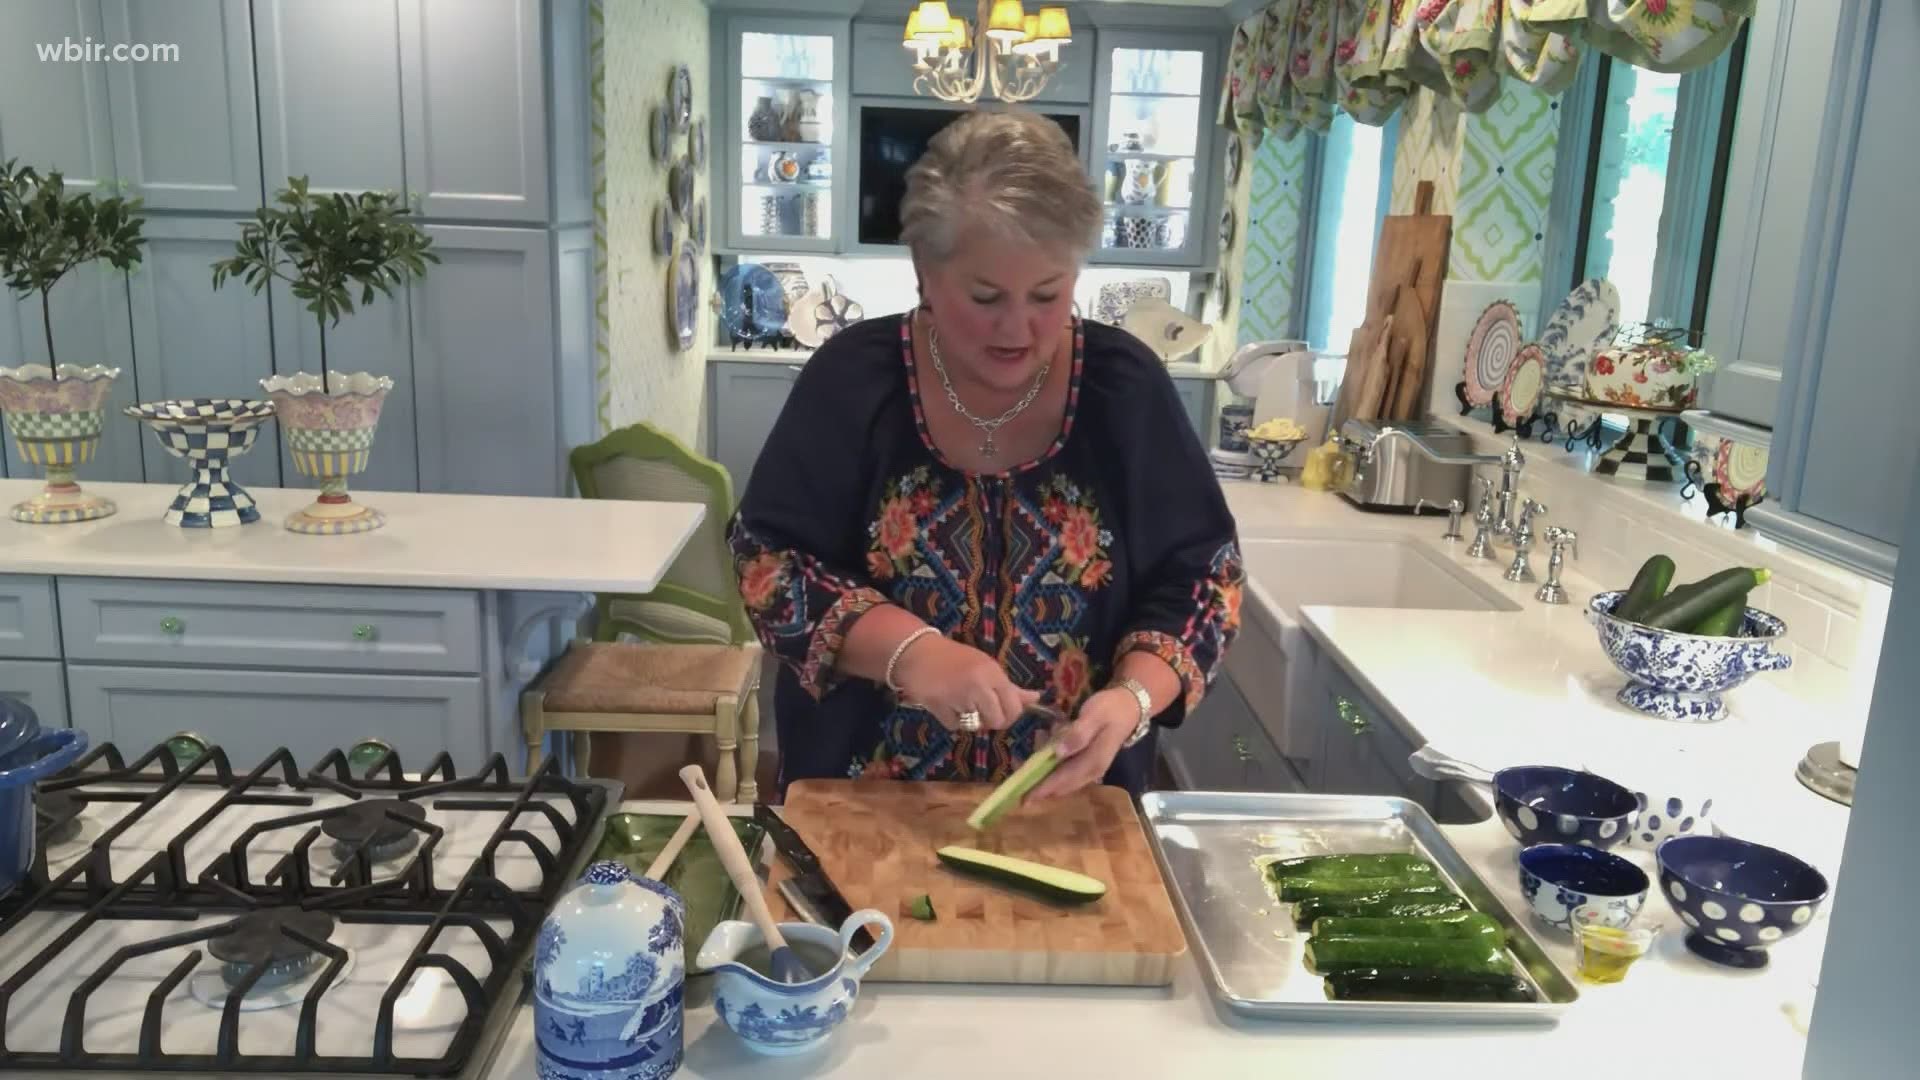 Joy McCabe shares a recipe for Roasted Zucchini Boats. For more of Joy's recipes visit joymccabe.com. August 3, 2020-4pm.